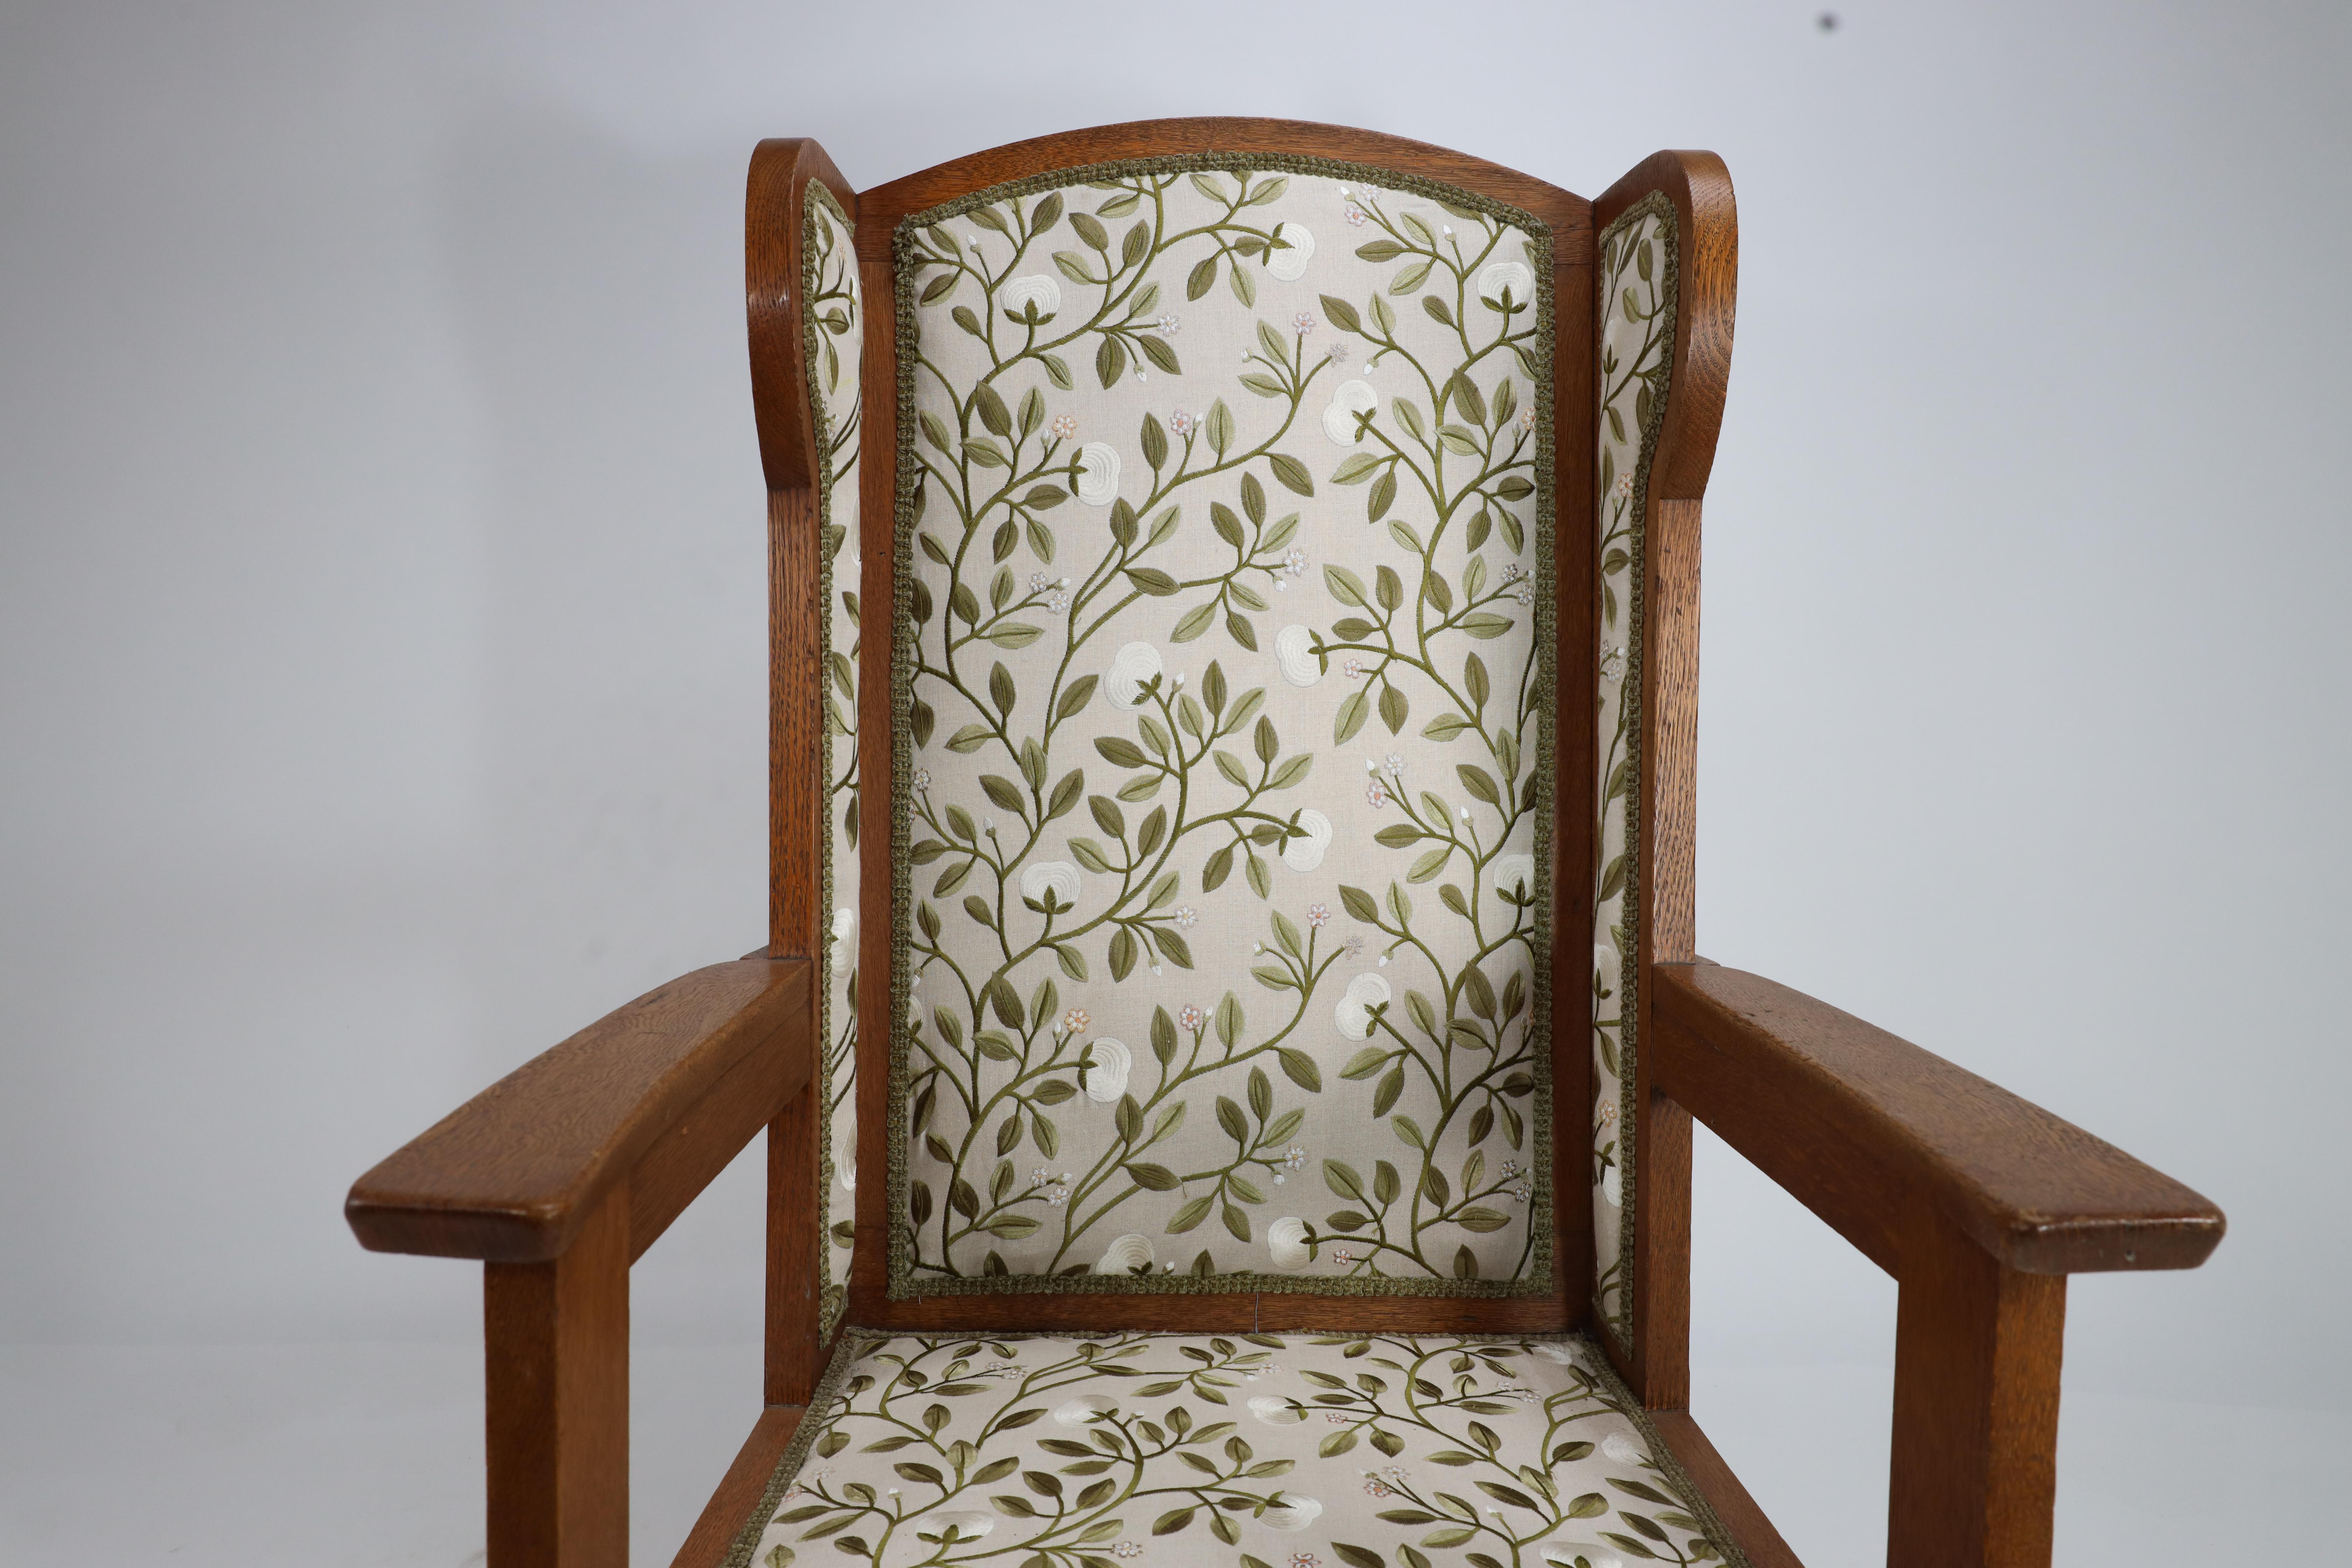 Early 20th Century E G Punnet attributed. Probably made by William Birch. An oak wing back armchair For Sale